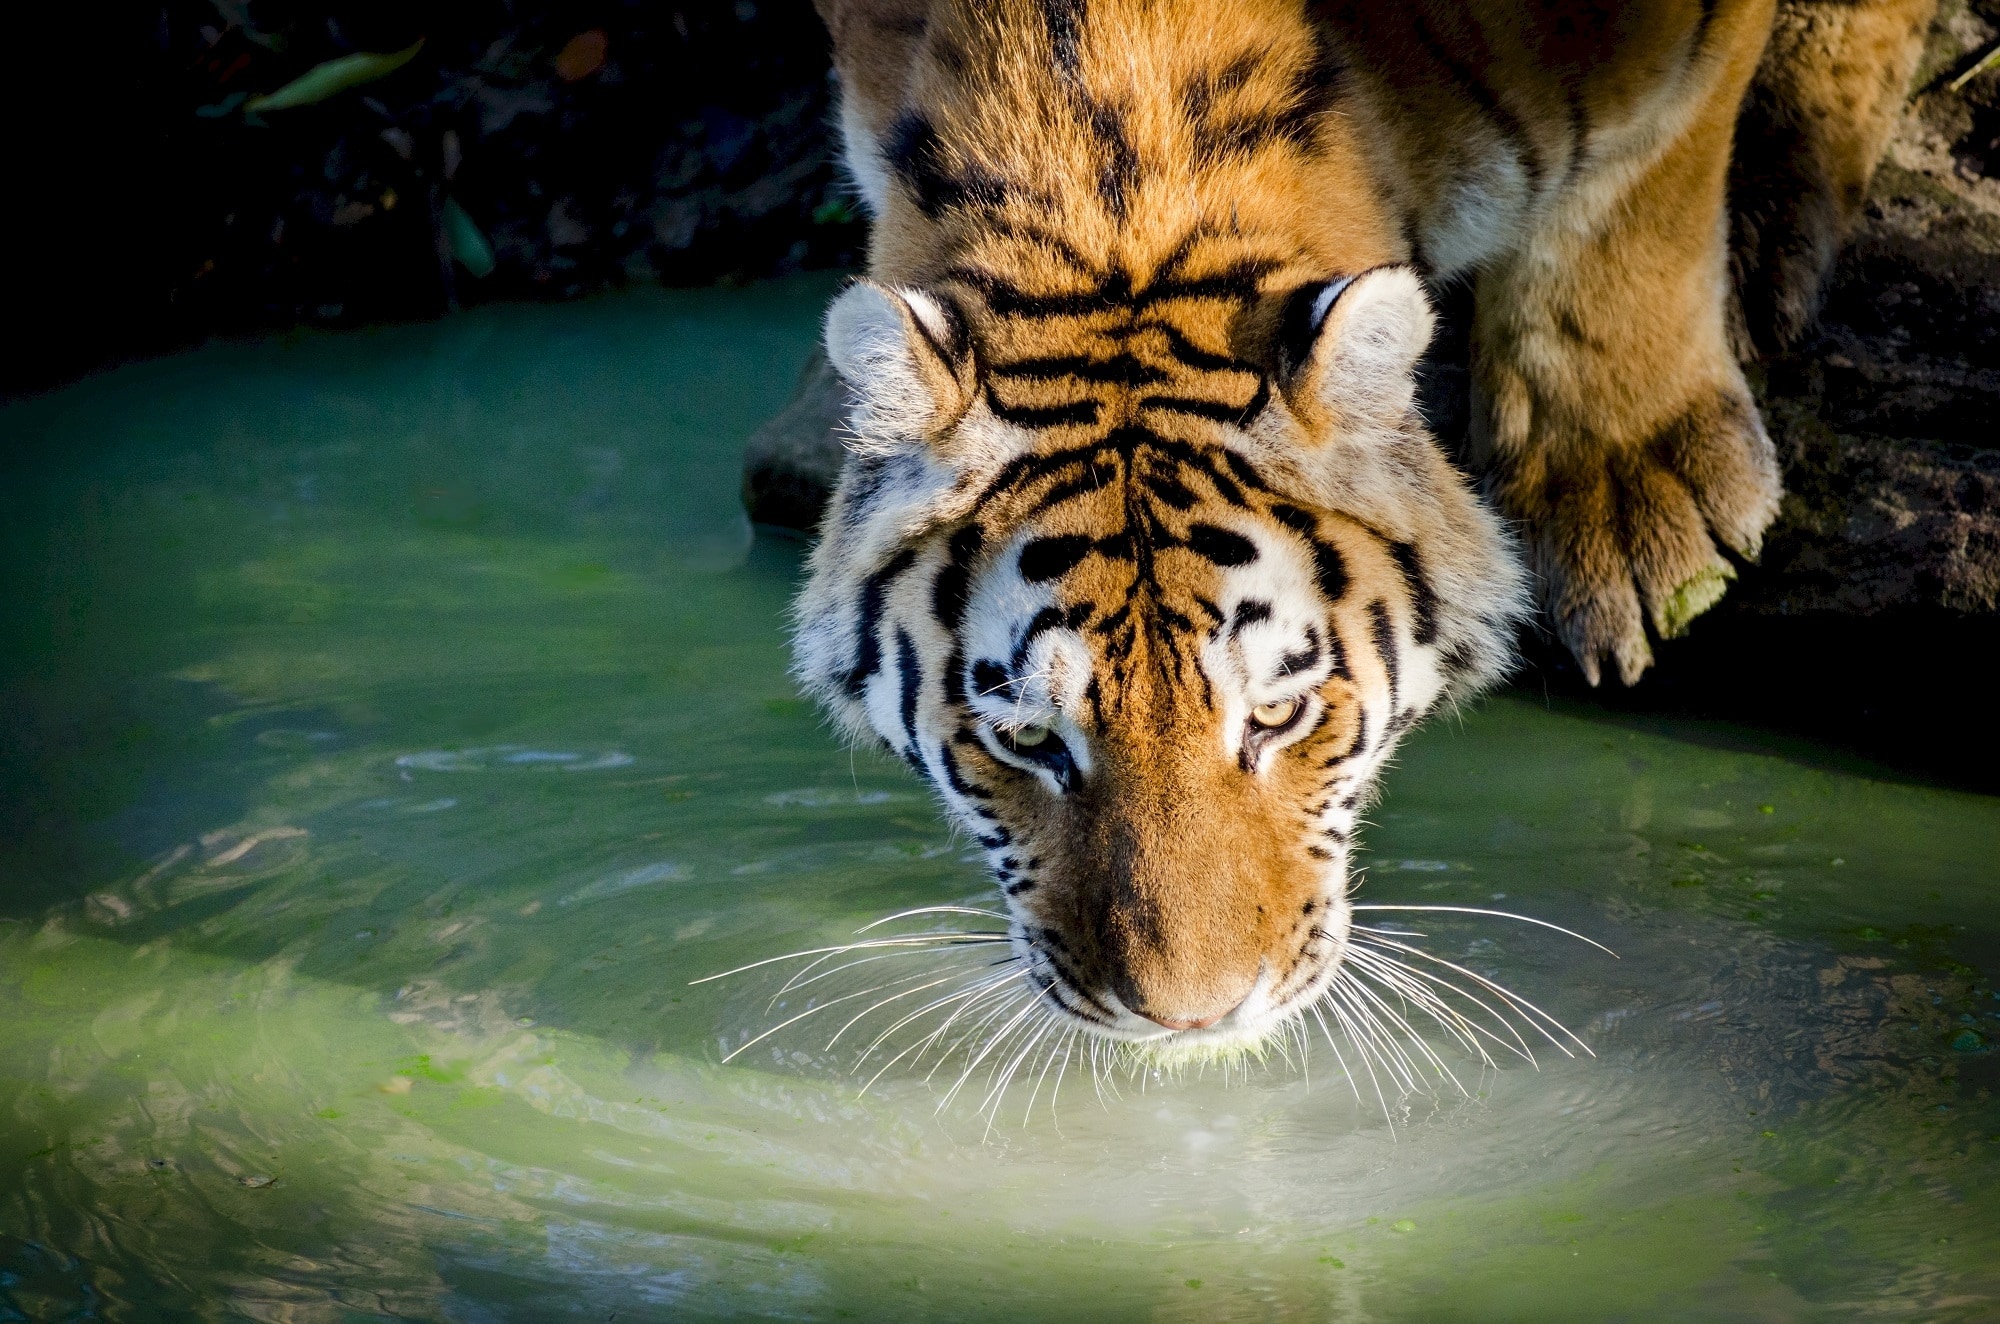 tiger drinking water selective photo